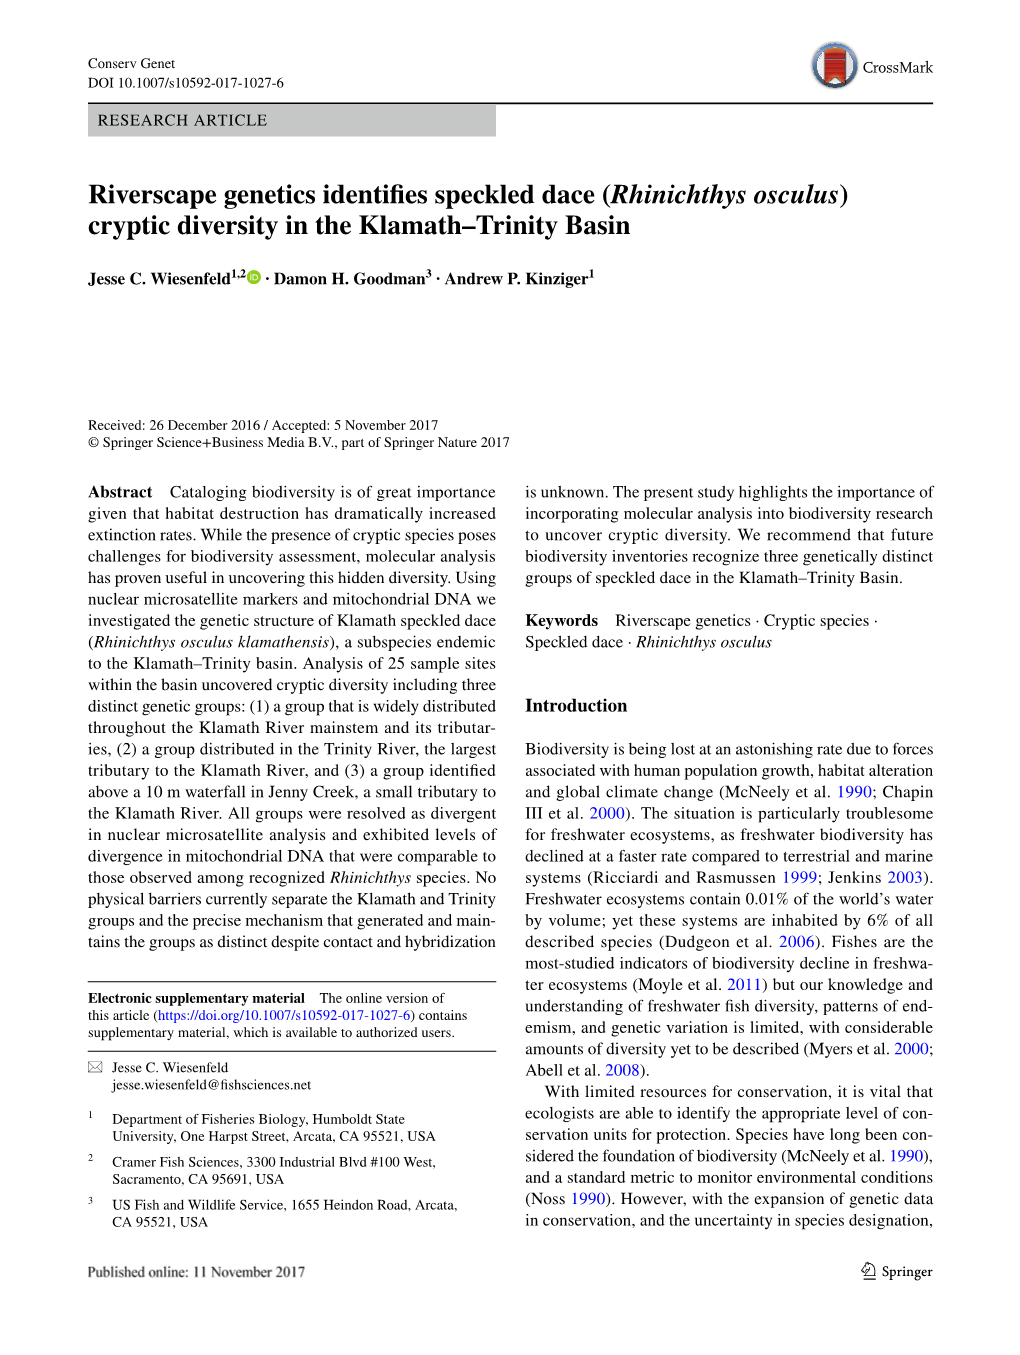 Riverscape Genetics Identifies Speckled Dace (Rhinichthys Osculus) Cryptic Diversity in the Klamath–Trinity Basin